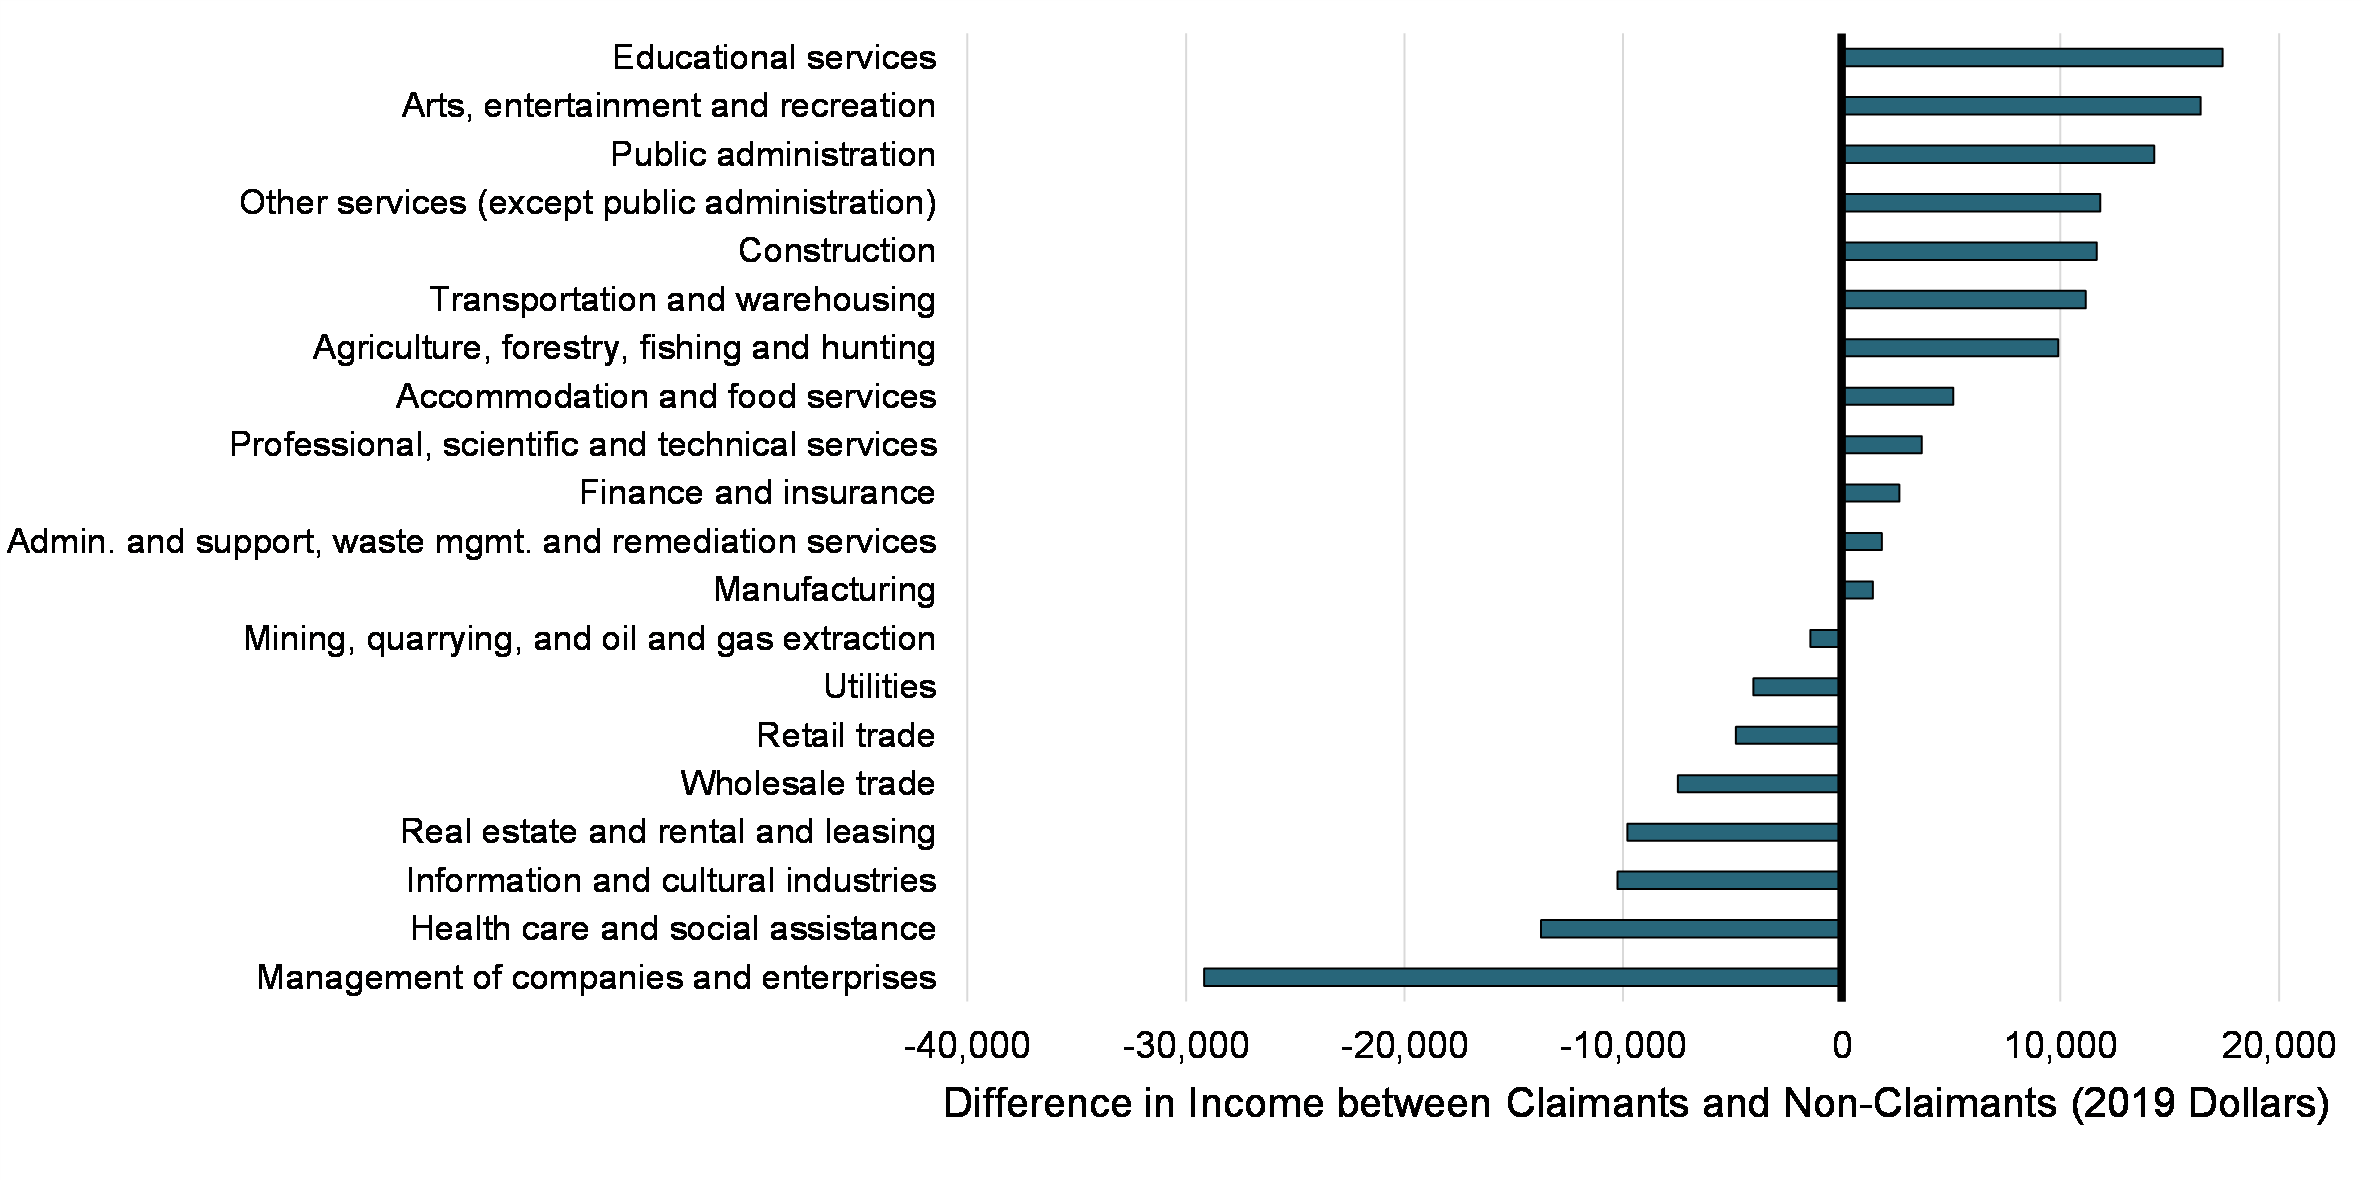 Chart 16: Difference in Average Incomes between UPD Claimants and Non-Claimants, by 2-Digit NAICS Industry (2019)